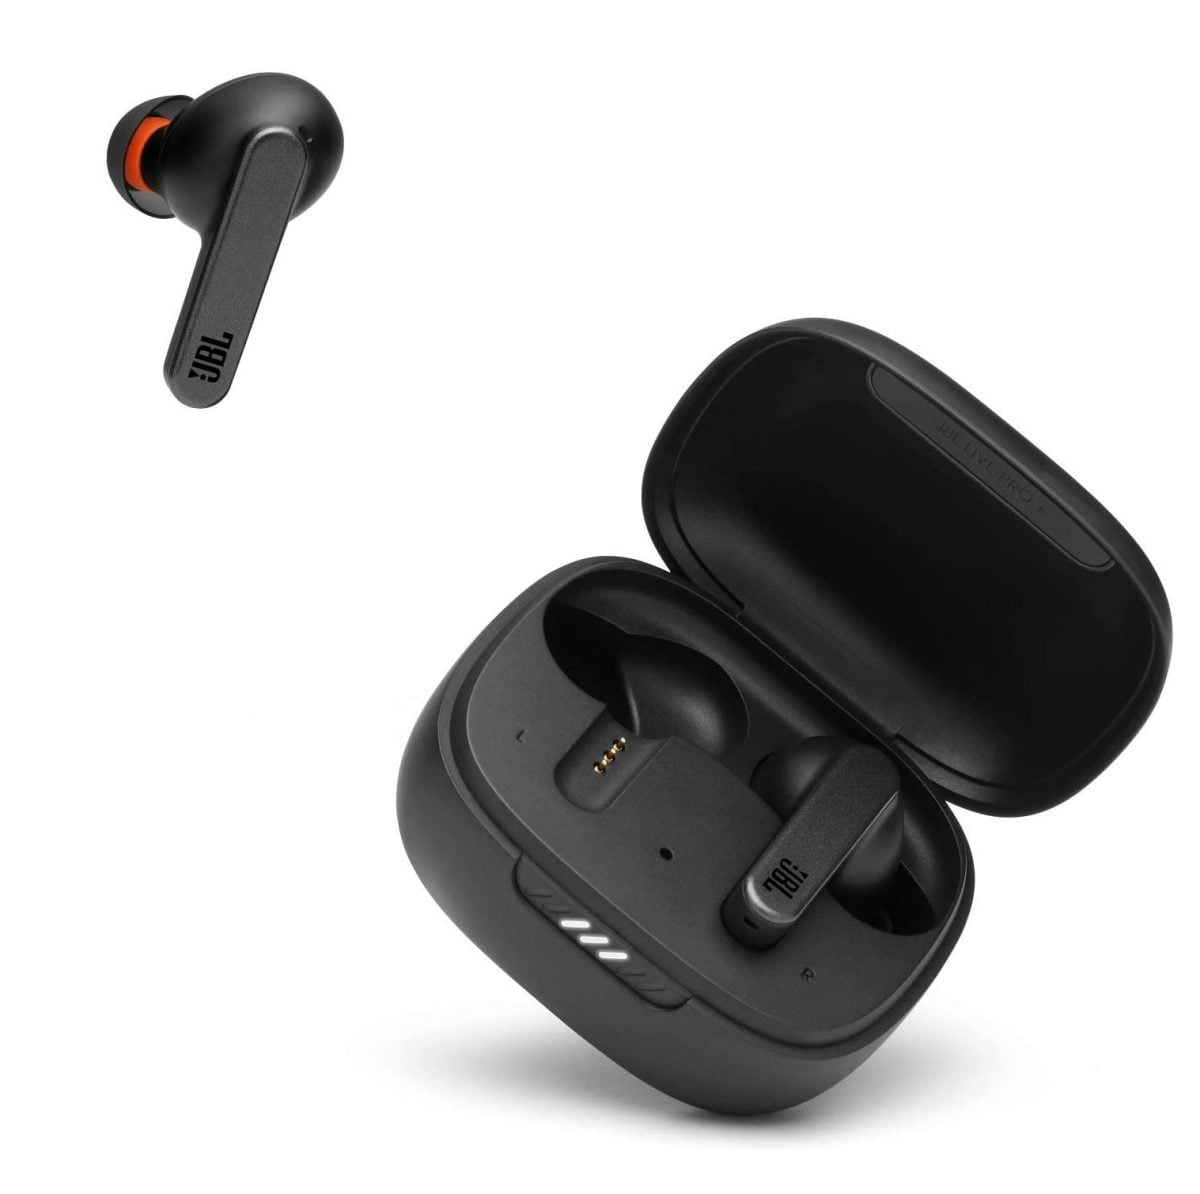 61Ny6Hsewql. Ac Sl1500 Jbl &Lt;H1&Gt;Jbl Live Pro Plus True Wireless Noise Cancelling Earbuds-Black&Lt;/H1&Gt; Https://Www.youtube.com/Watch?V=Oan6Moxjv58 &Nbsp; The Best Audio Solution Not Matter The Device, Jbl Live Pro+ Tws Delivers An Immersive True Wireless Experience With Incredible Jbl Signature Sound. Let Smart Ambient Connect You To Your Environment, Or Focus On The Music With Adaptive Noise Cancelling. Then Switch Easily From Tunes To Group Calls With 4 Mics (2 Beamforming Mics Per Side) To Capture Your Voice With The Feeling Of Face-To-Face Conversation And A Third Mic For Environmental Noise Reduction. All Commands Are On The Earbuds, So You Can Manage Music And Calls With Your Finger Only. Jbl Earbuds Jbl Live Pro Plus Noise Cancelling Earbuds-Black